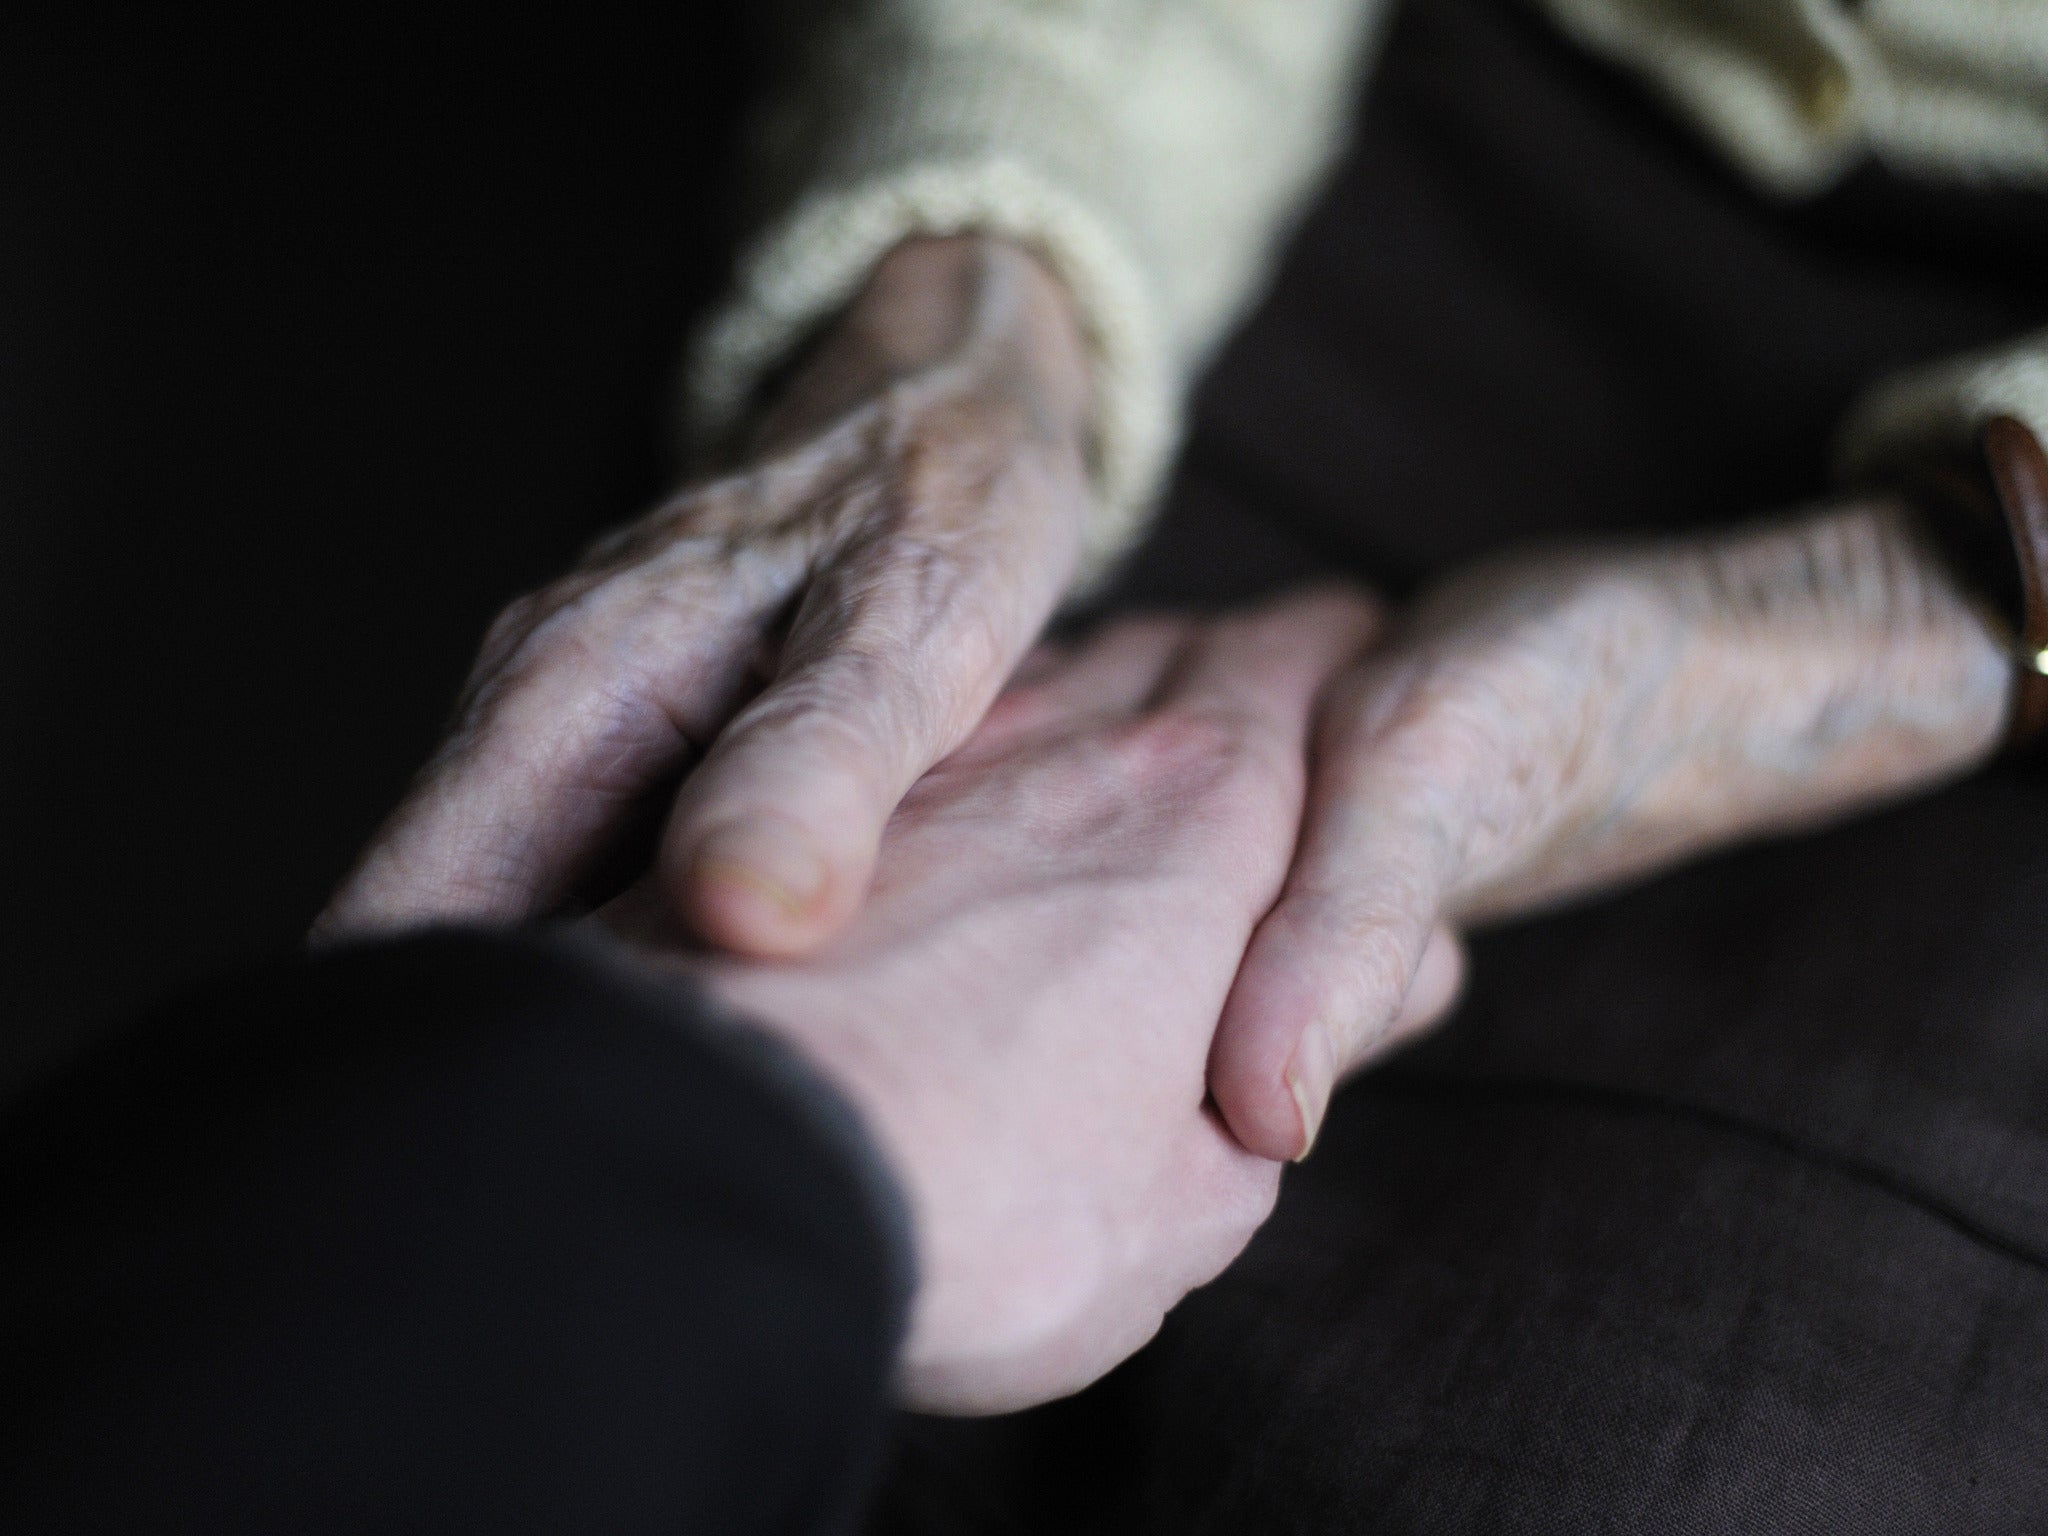 Alzheimer's disease mainly affects people over the age of 65